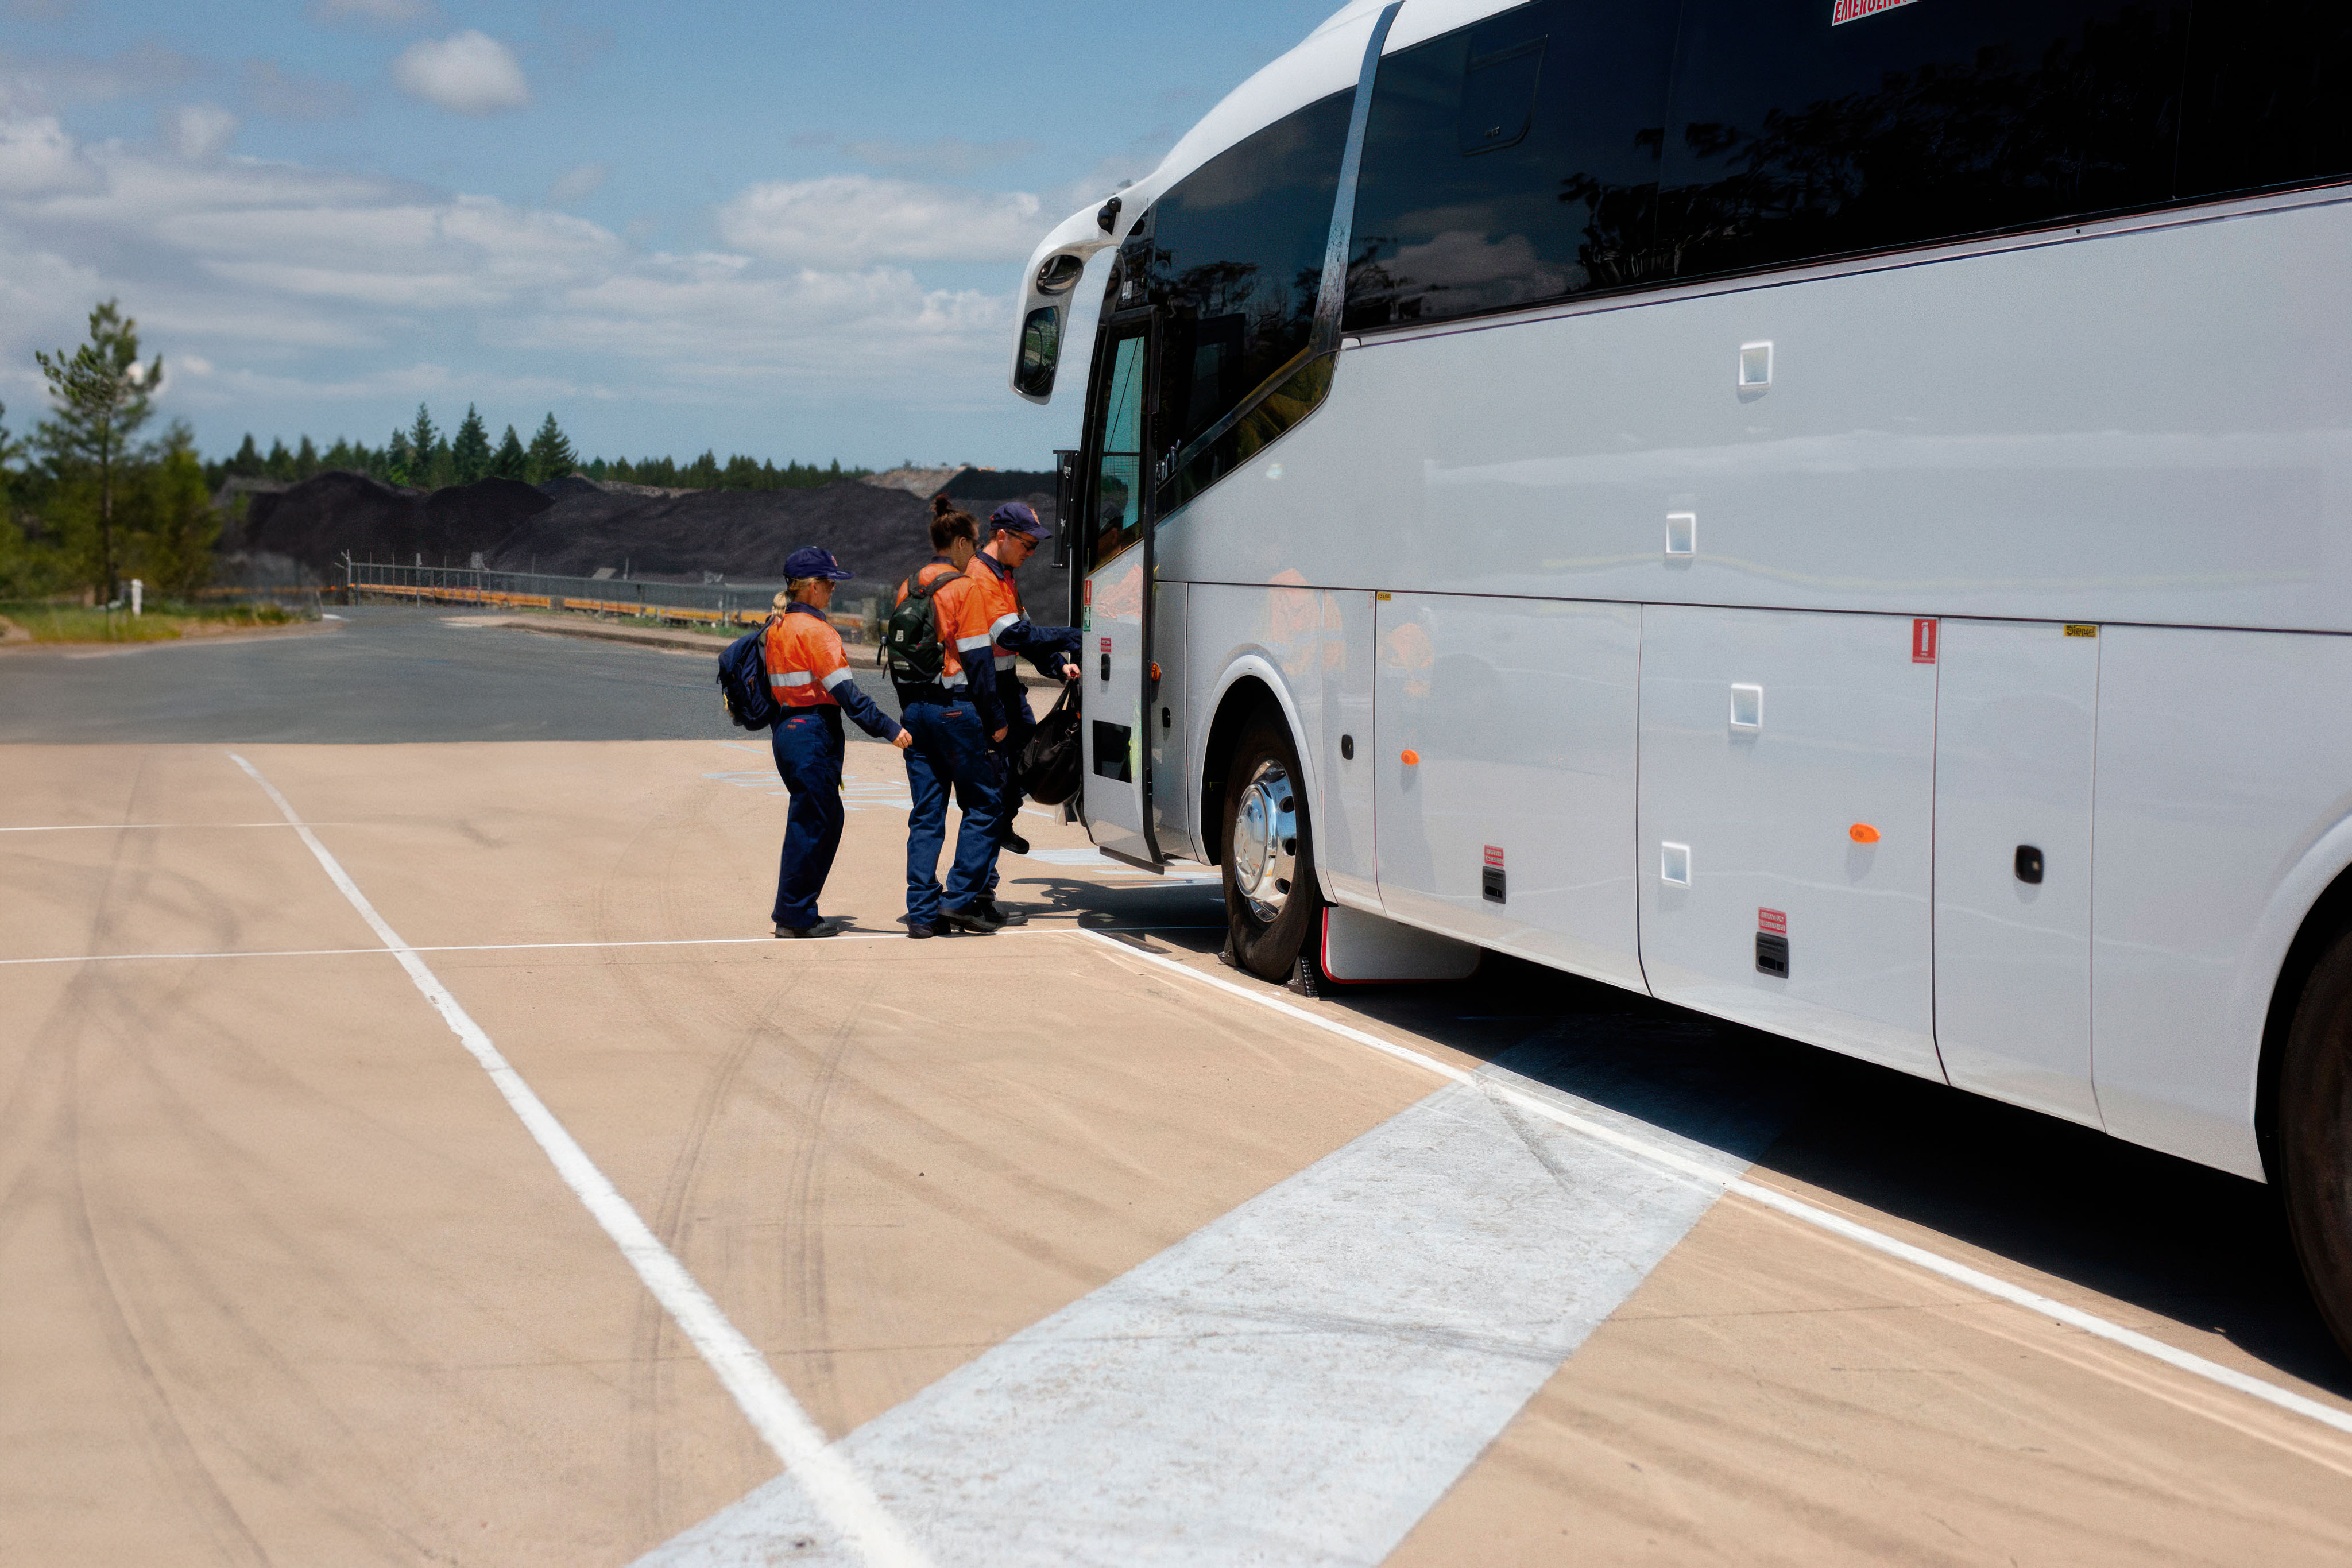 fifo-workers-board-chartered-bus